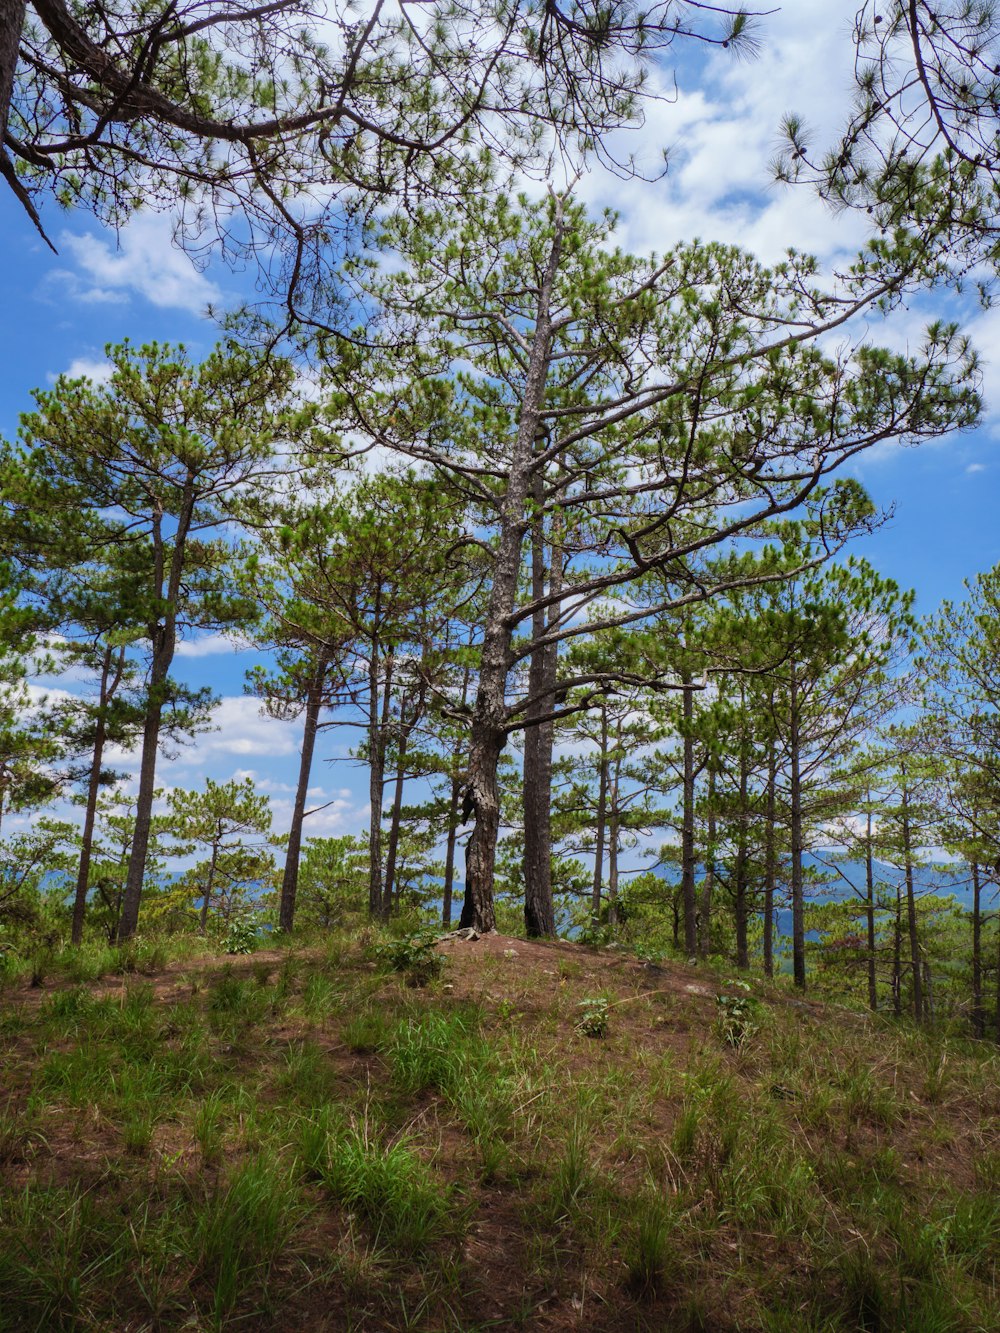 a group of trees on a hill with a blue sky in the background